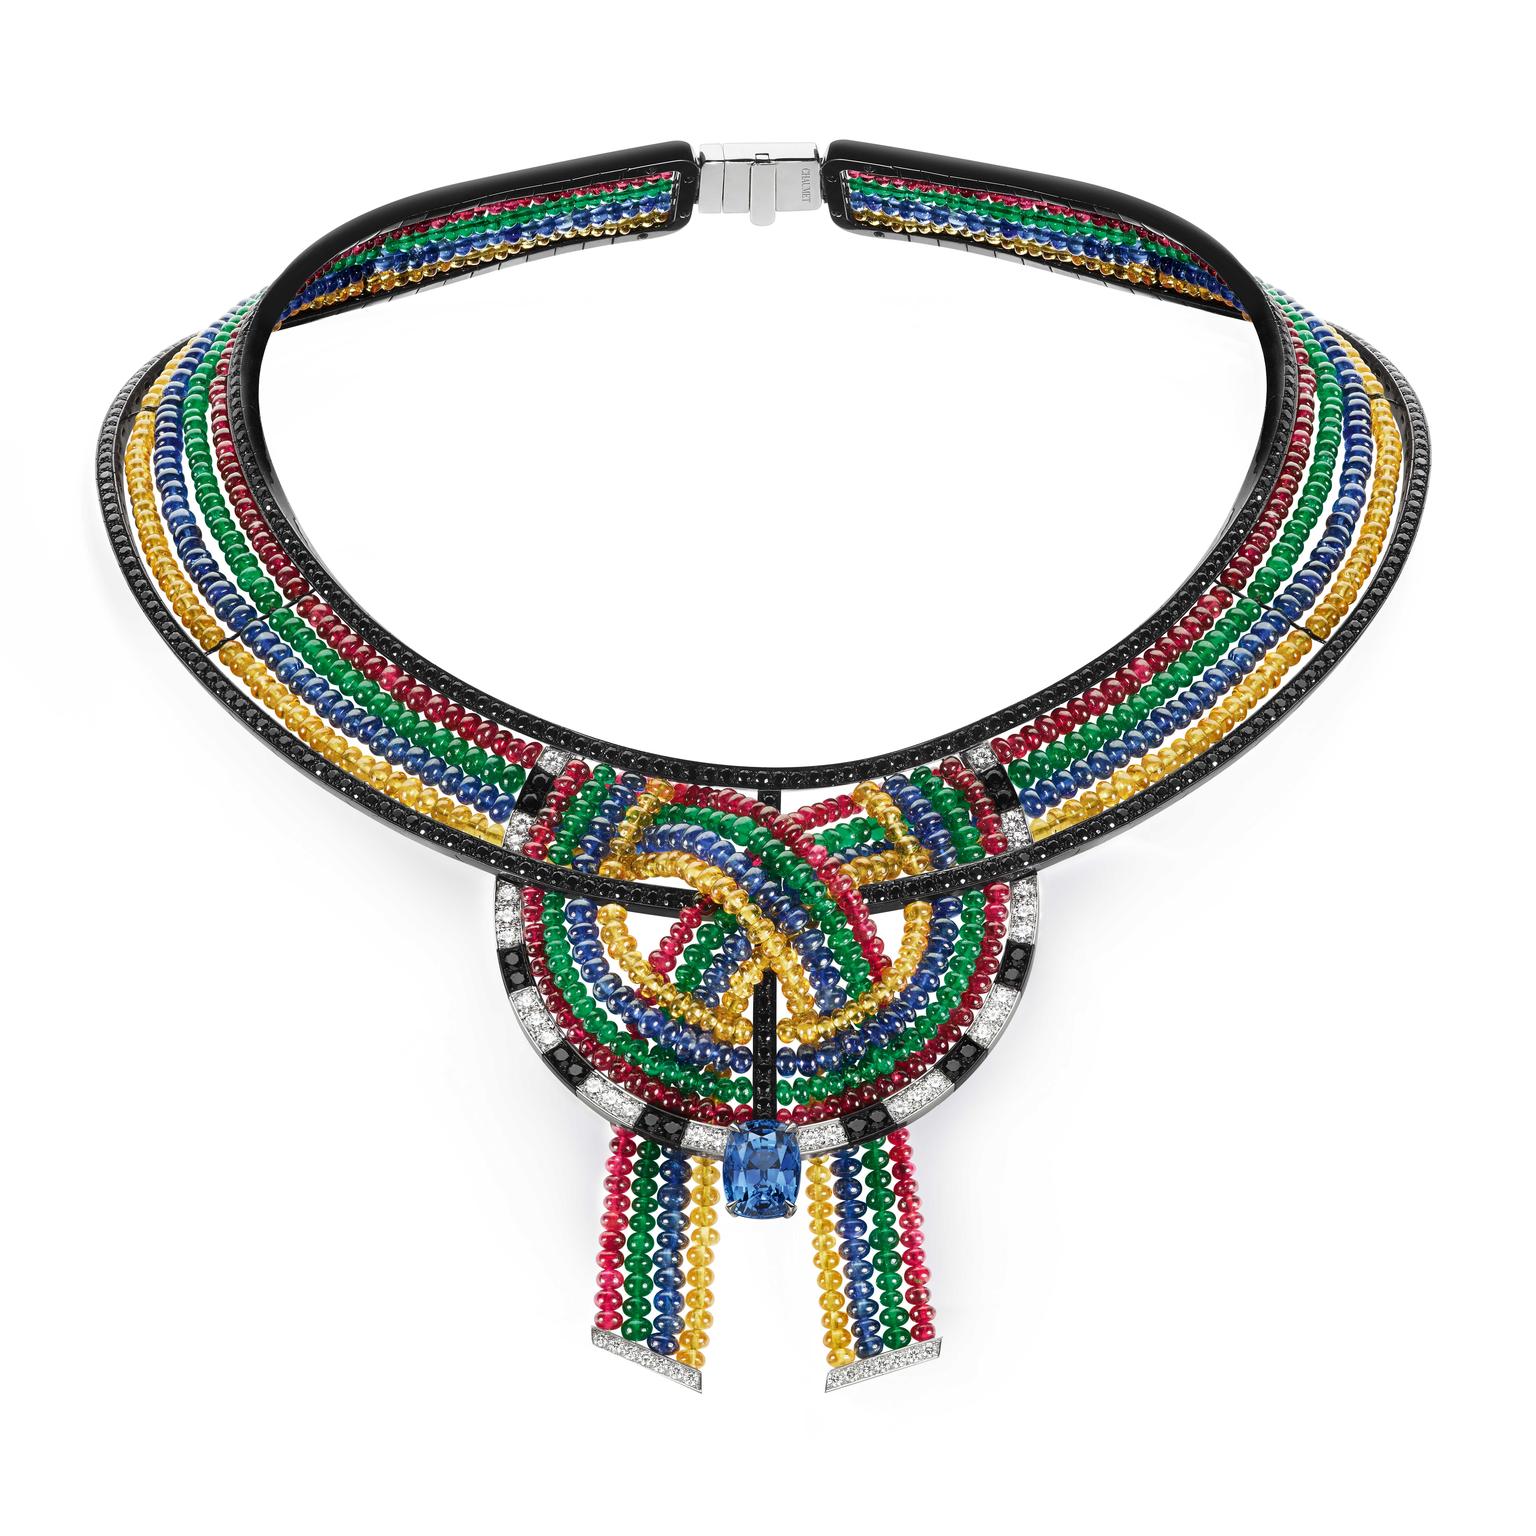 Chaumet Ronde de Pierres spinel, emeralds, sapphire and mandarine garnet necklace inspired by Sudan and Kenya